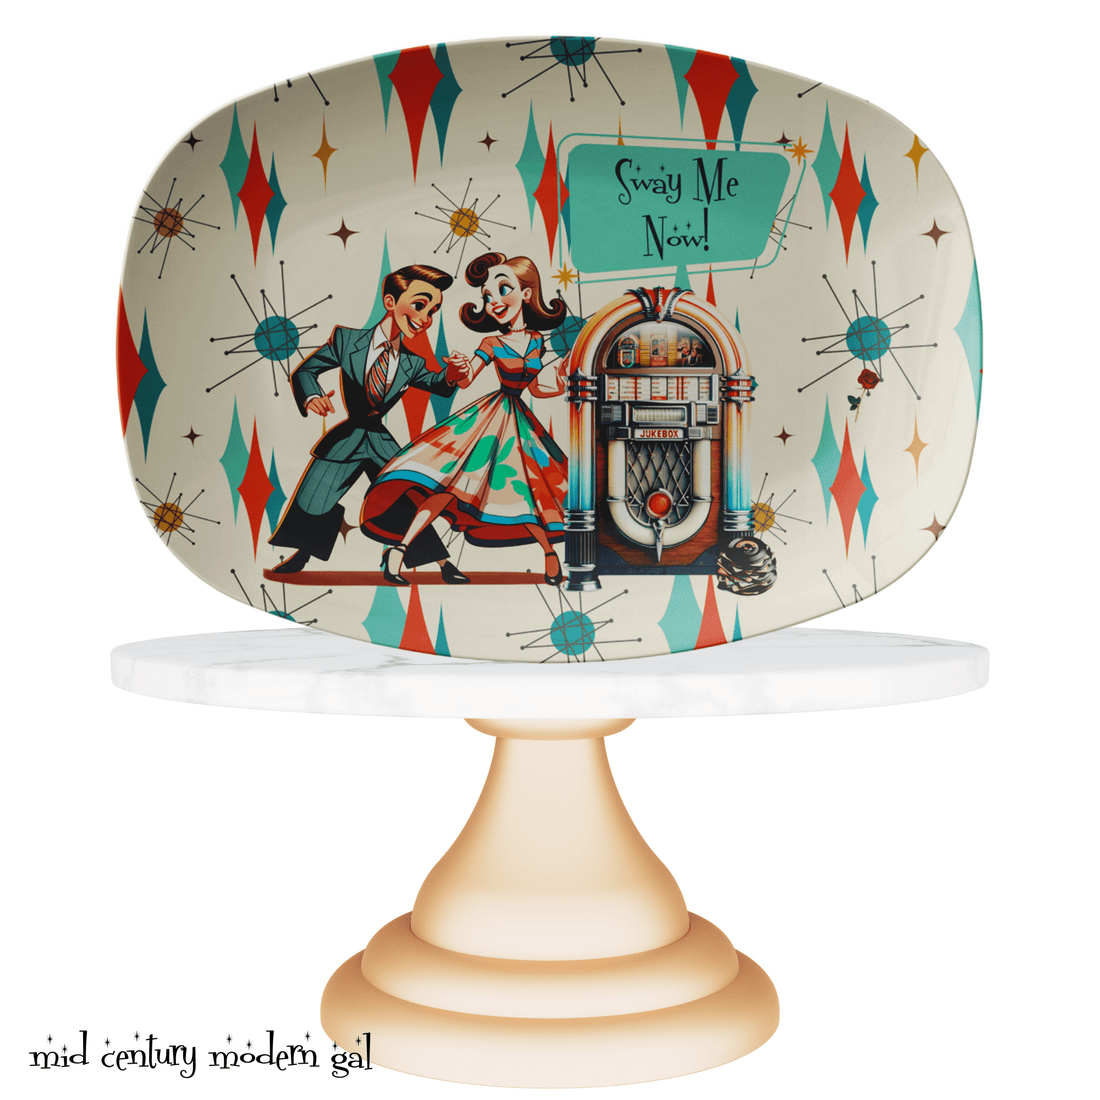 50s Style Couple, Sway Me Now, Kitschy Mid Century Modern Party Platter